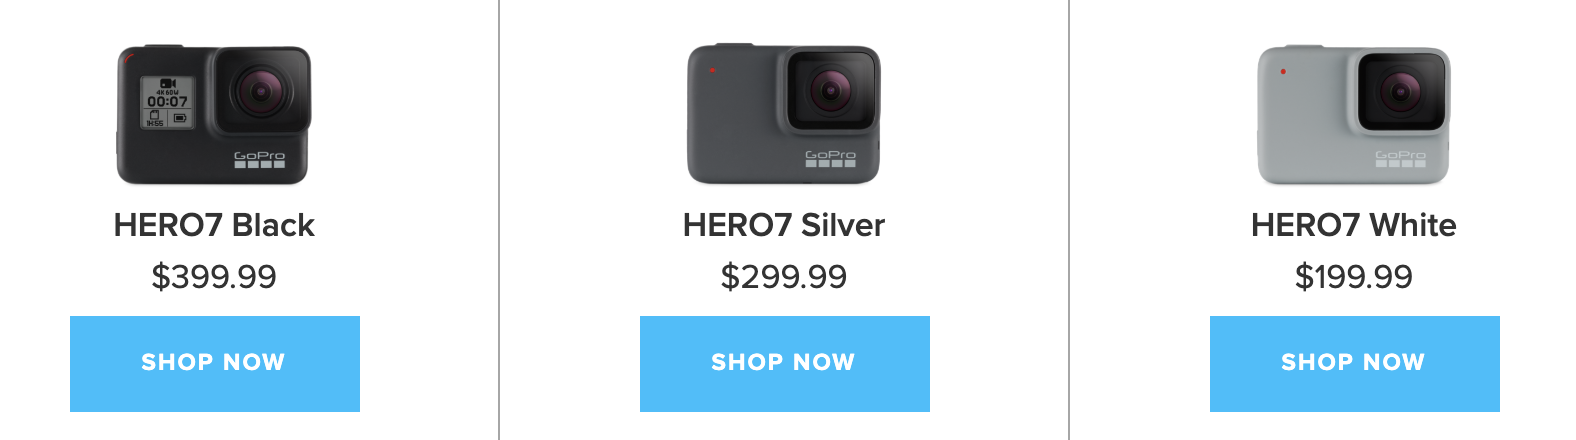 a black camera with a blue text